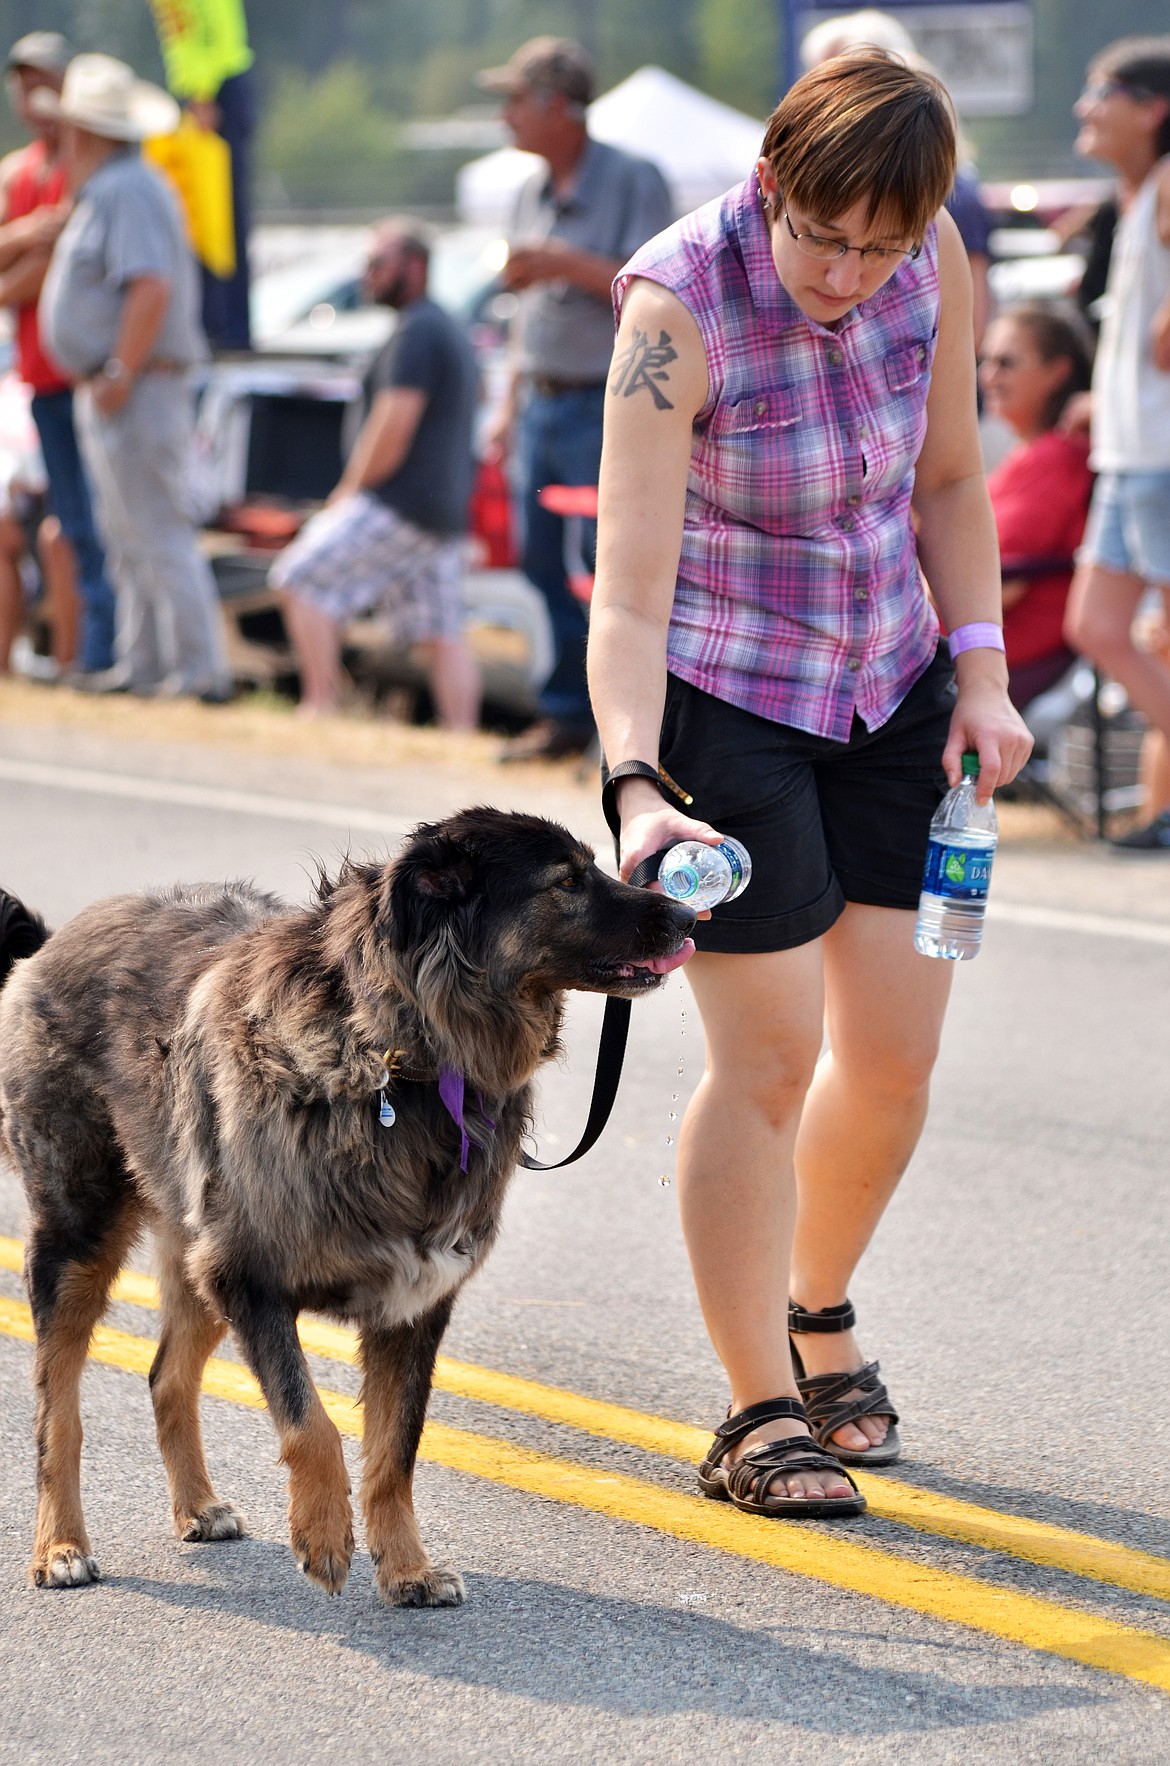 It&#146;s a tough walk in the heat, and this pup had to get a quick drink as they walked through the parade. (Erin Jusseaume/ Clark Fork Valley Press)